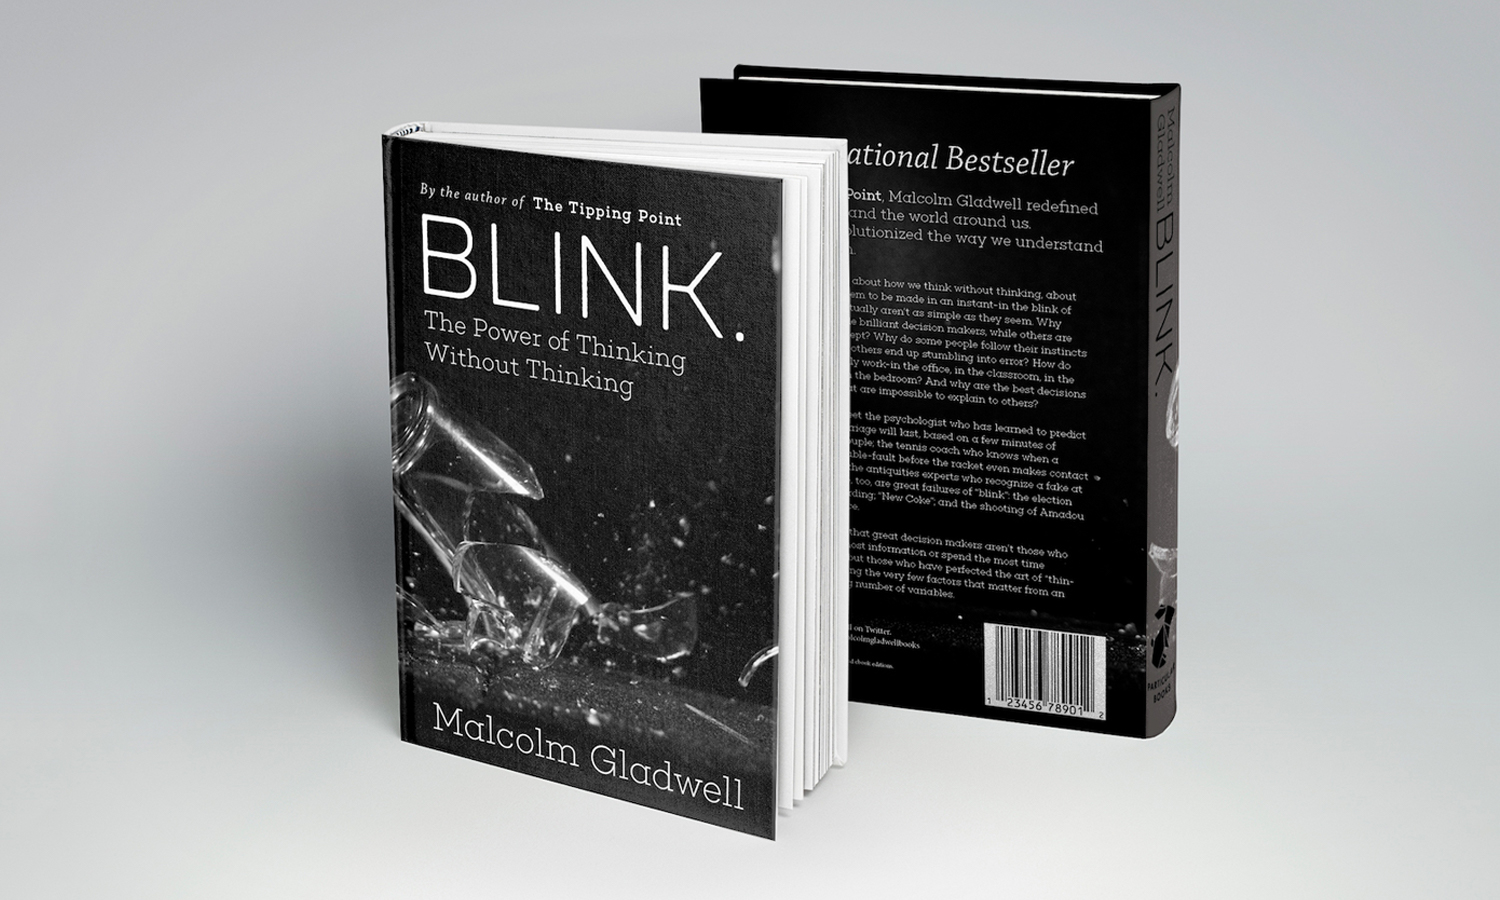 Mockup of book cover. The book, Blink, has an image of a glass breaking